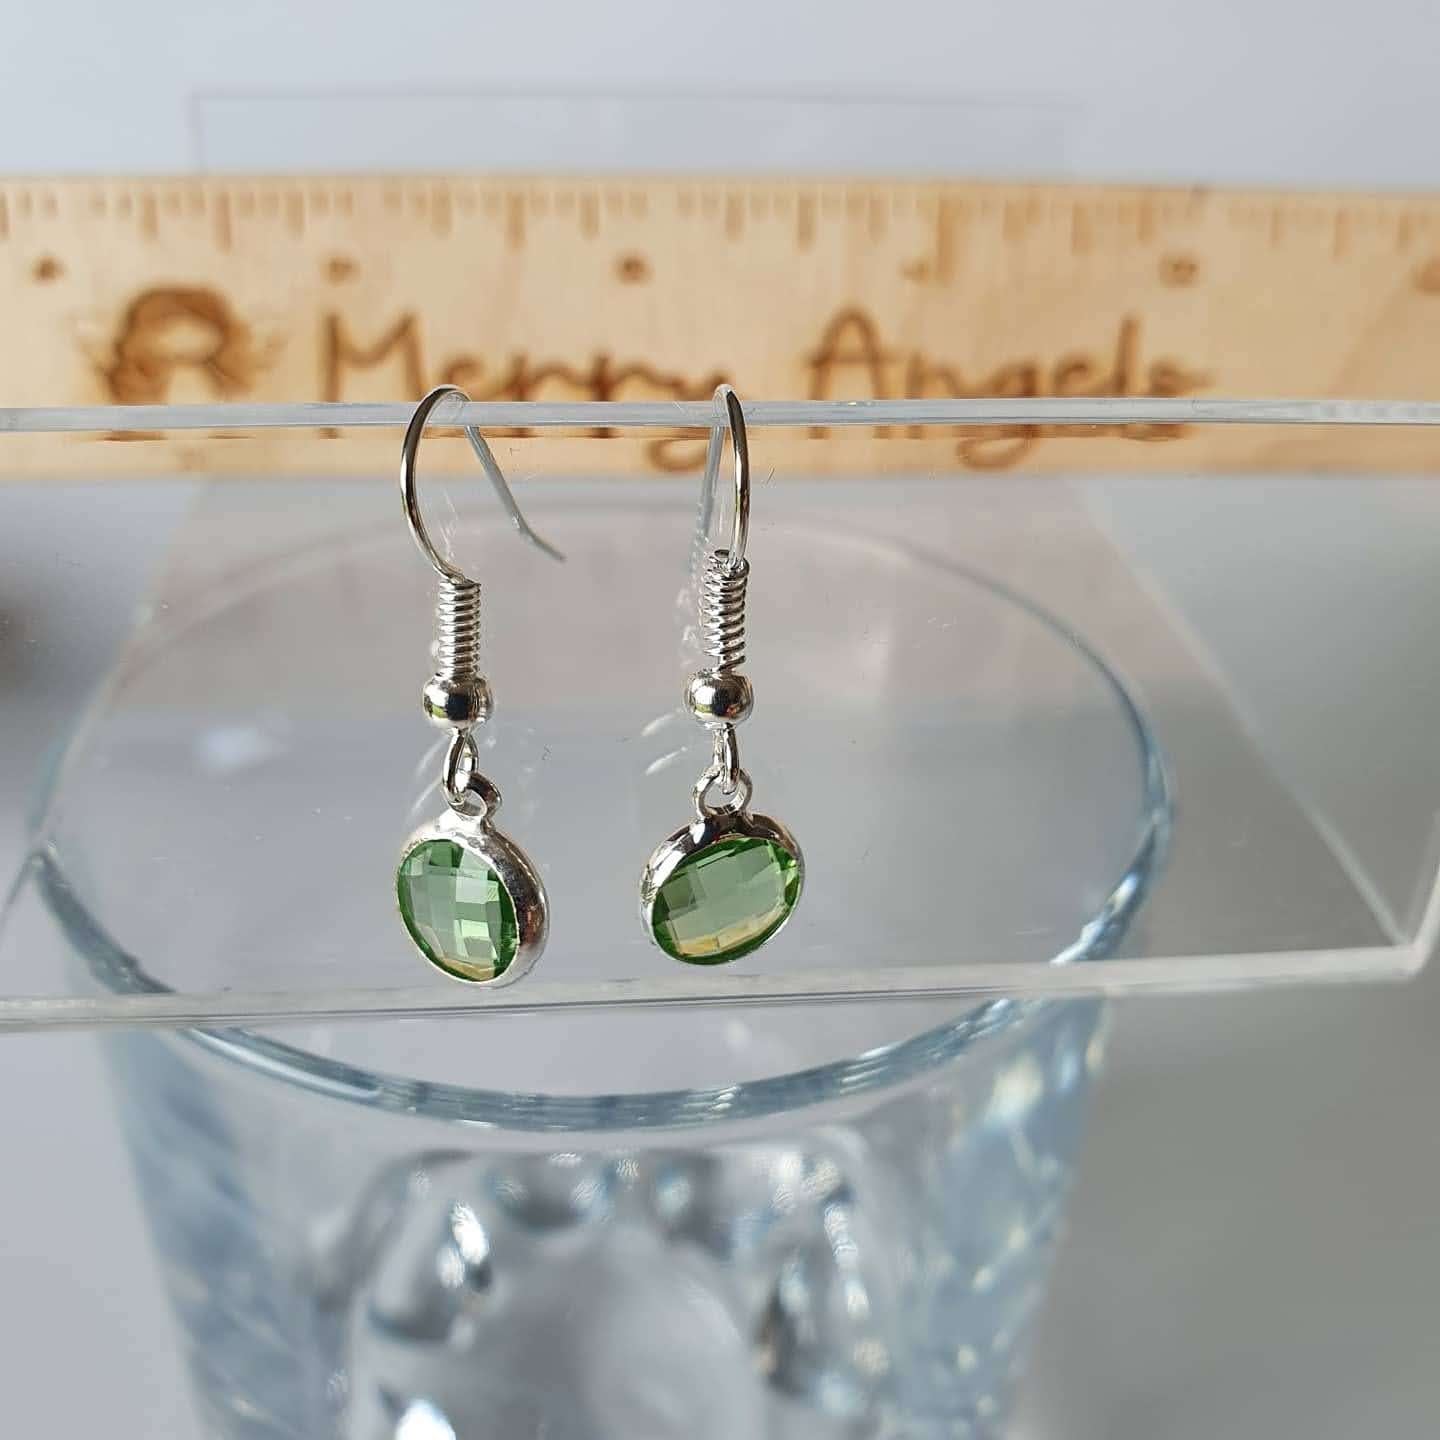 This is a picture of a pair of green earrings hanging over a wine glass